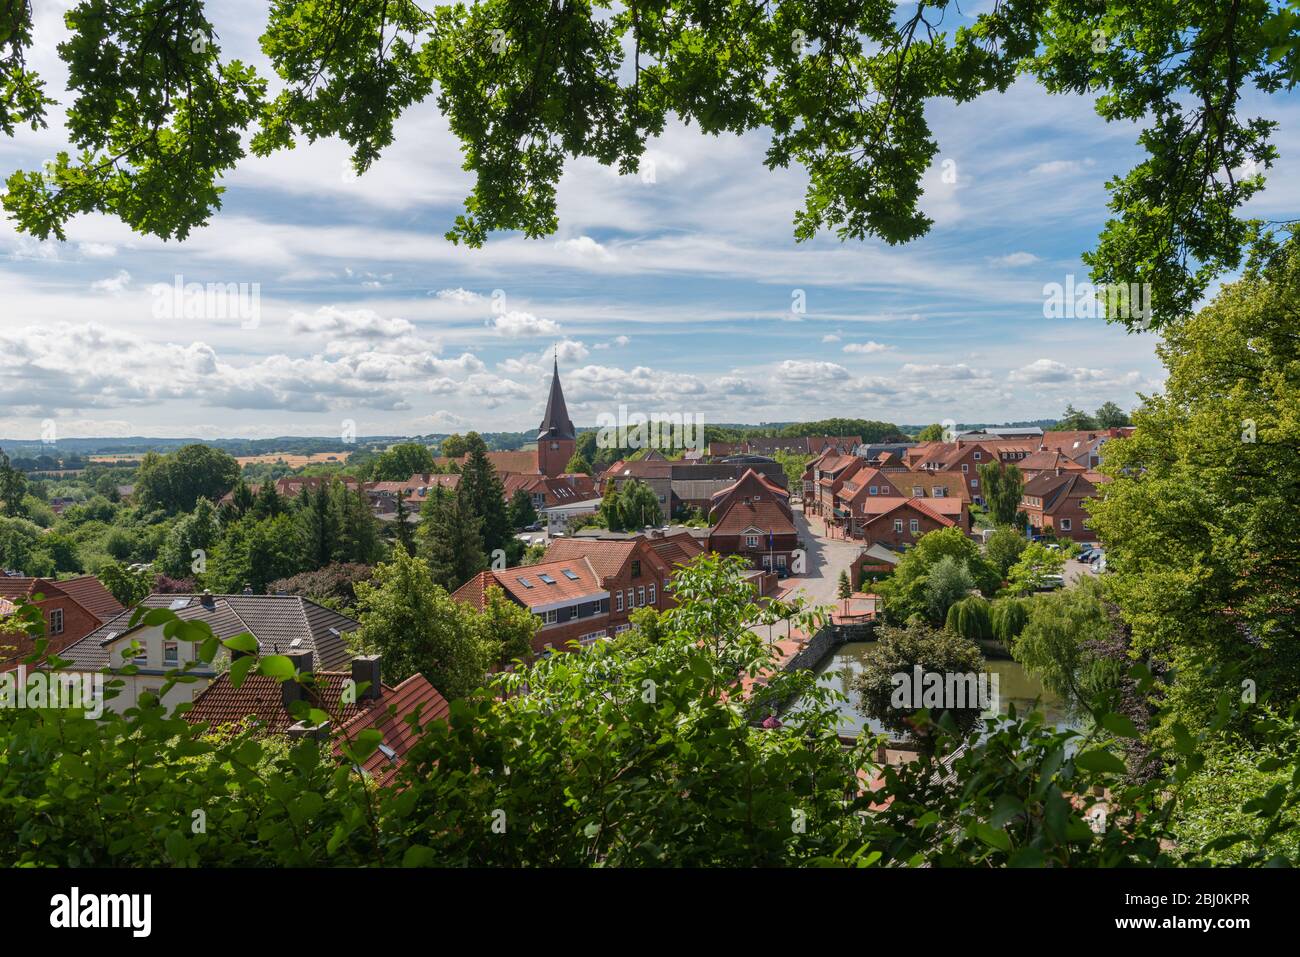 Small country town of Lütjenburg with St.-Michaelis-Kirche, Kreis Plön, Schleswig-Holstein, North Germany, Central Europe Stock Photo